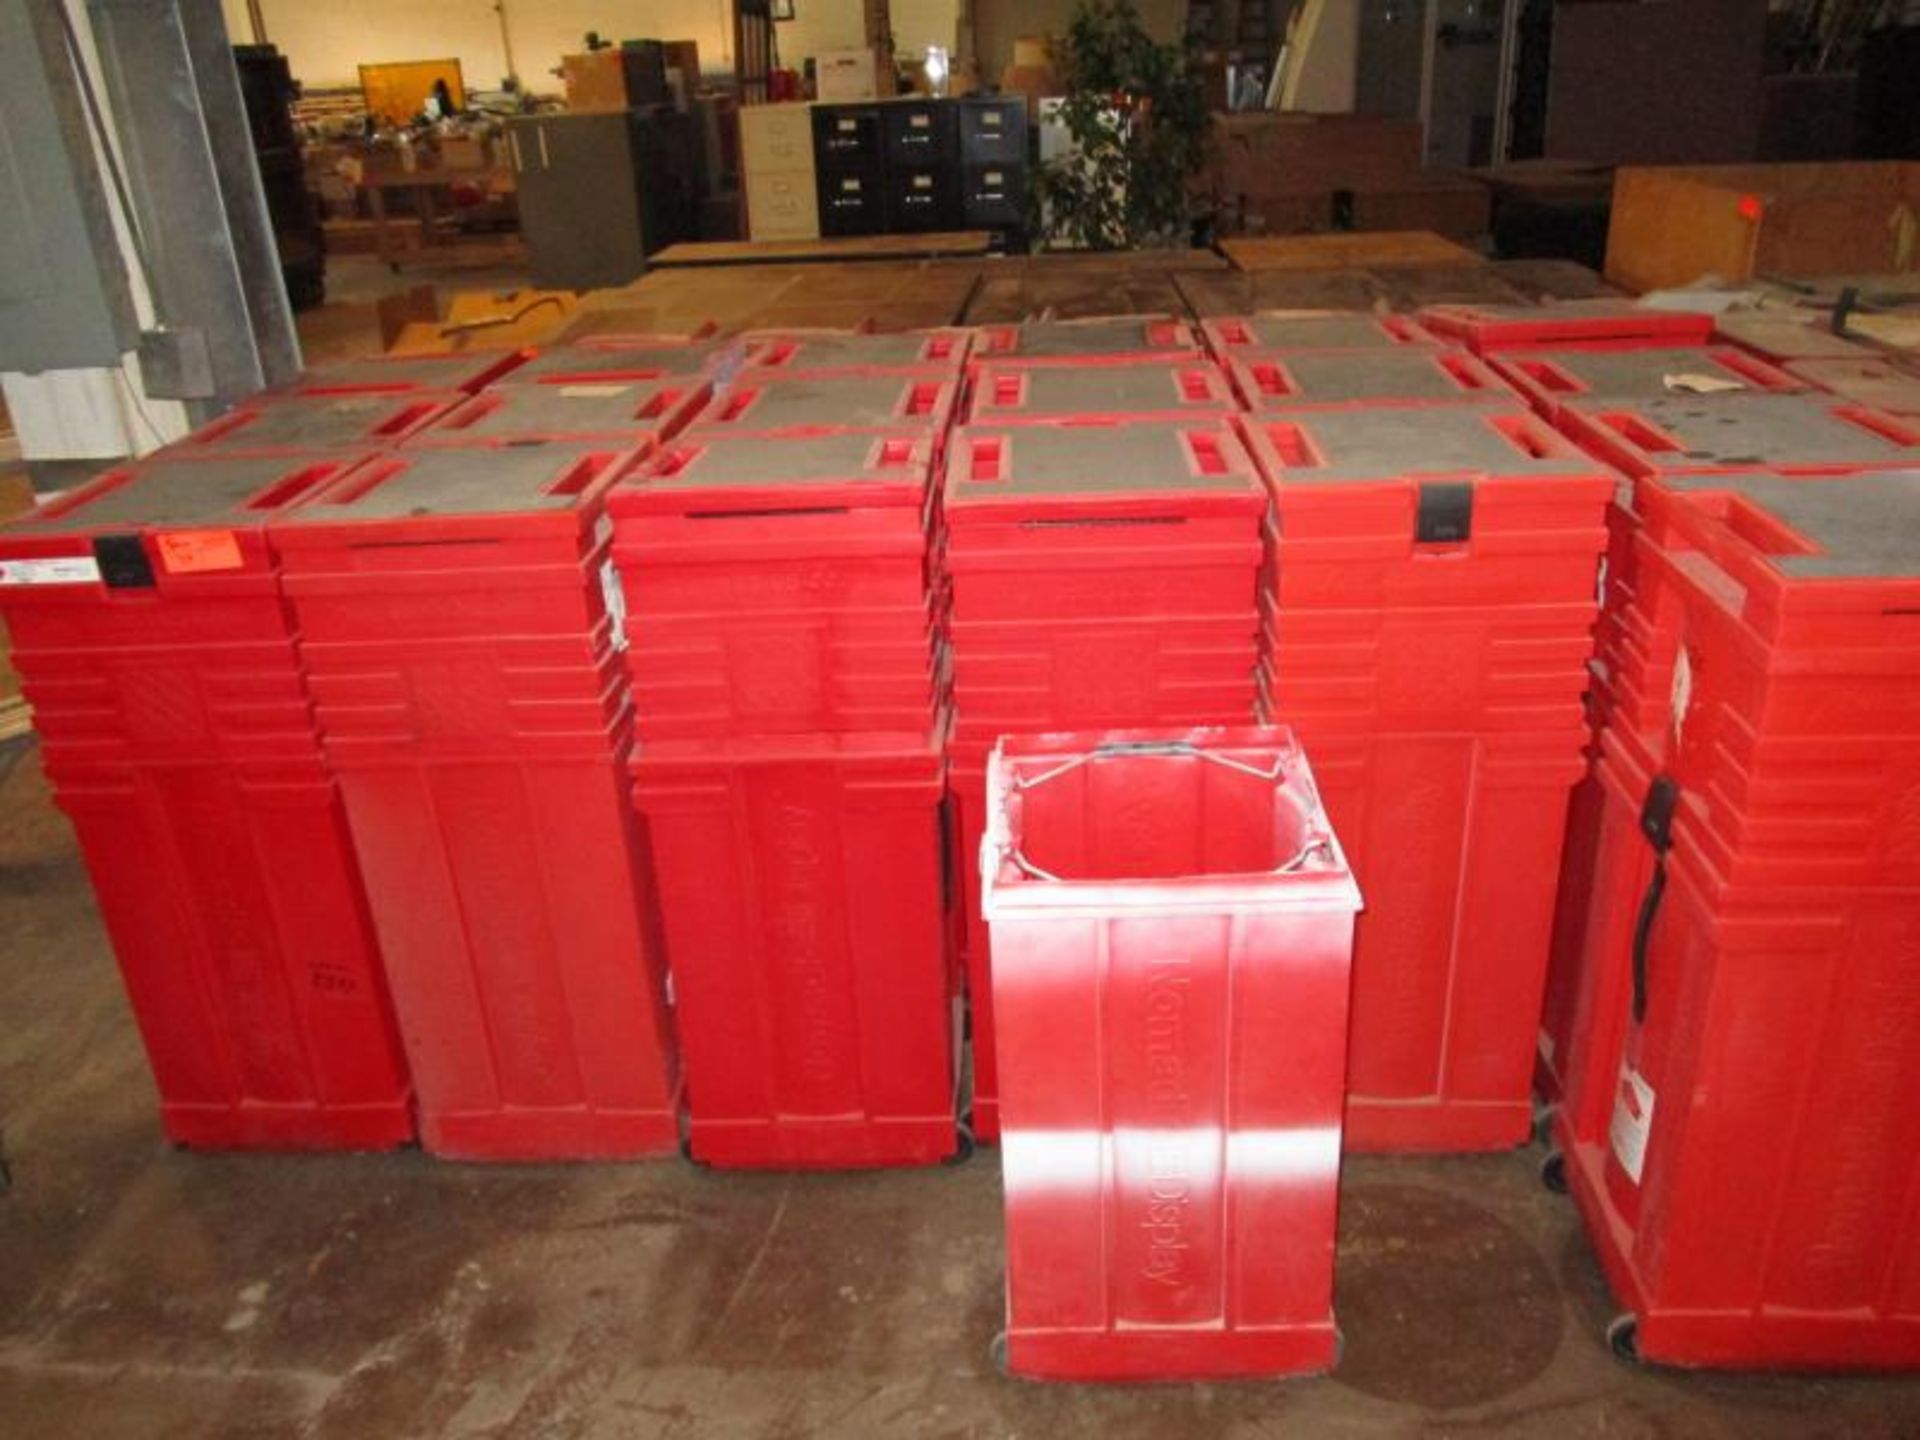 (20) Red Road Cases - Rectangular - (1) Missing Top, Rolling, By Nomadic Display Top, Rolling, By